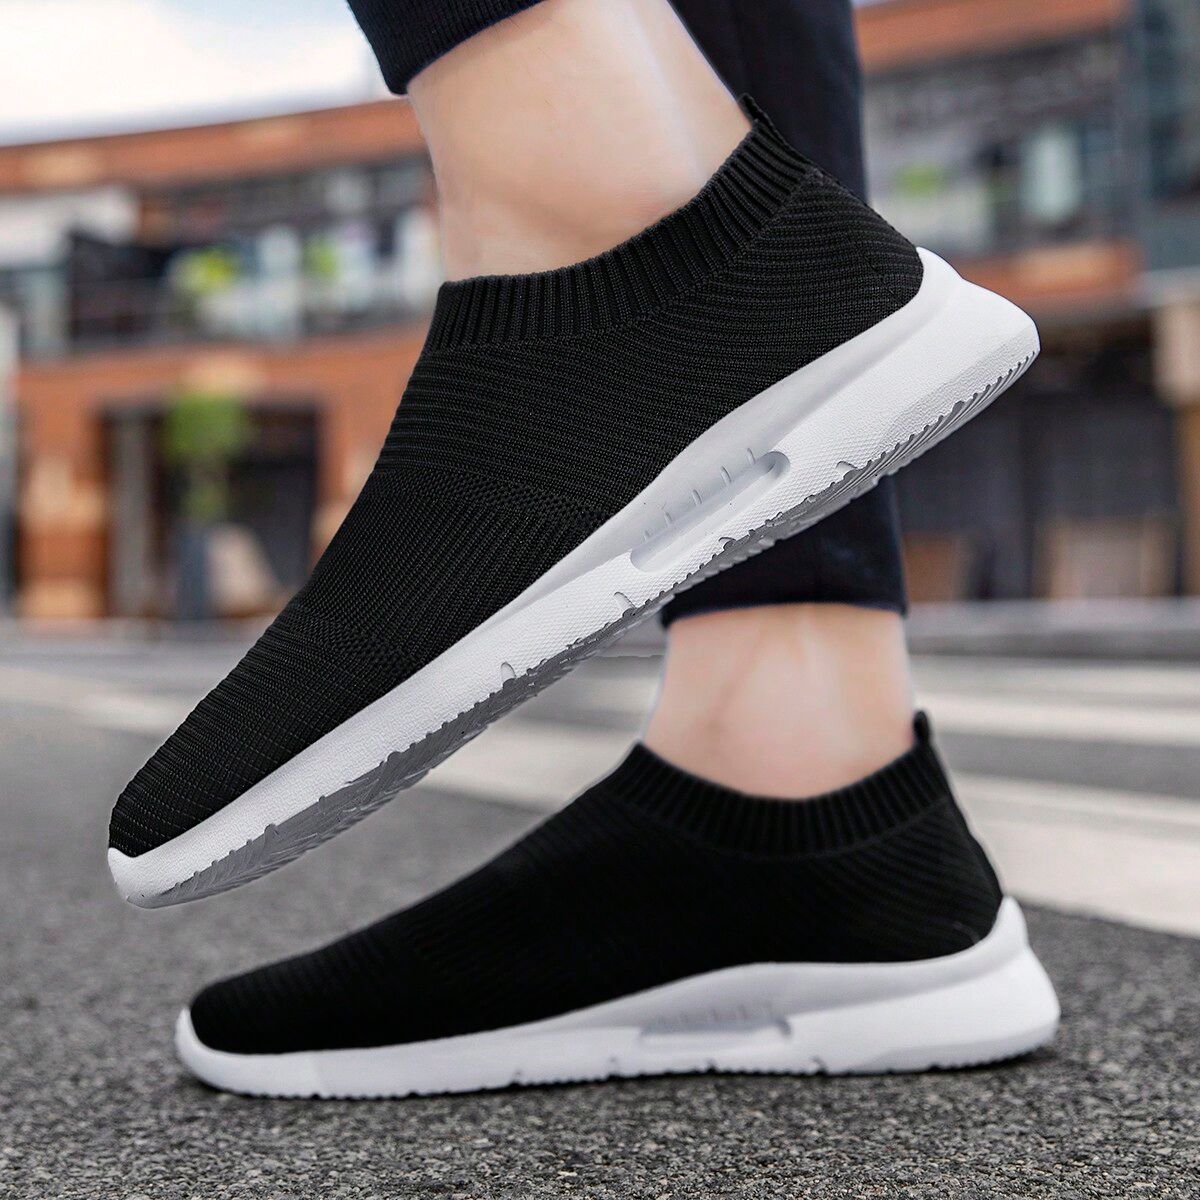 SHEIN Mens Slip On Shoes Loafers Casual Sneakers Lightweight Male Flats Work Gym Shoes Footwear Chaussure Homme Black and White EUR36,EUR37,EUR38,EUR39,EUR40,EUR41,EUR42,EUR43,EUR44,EUR45,EUR46